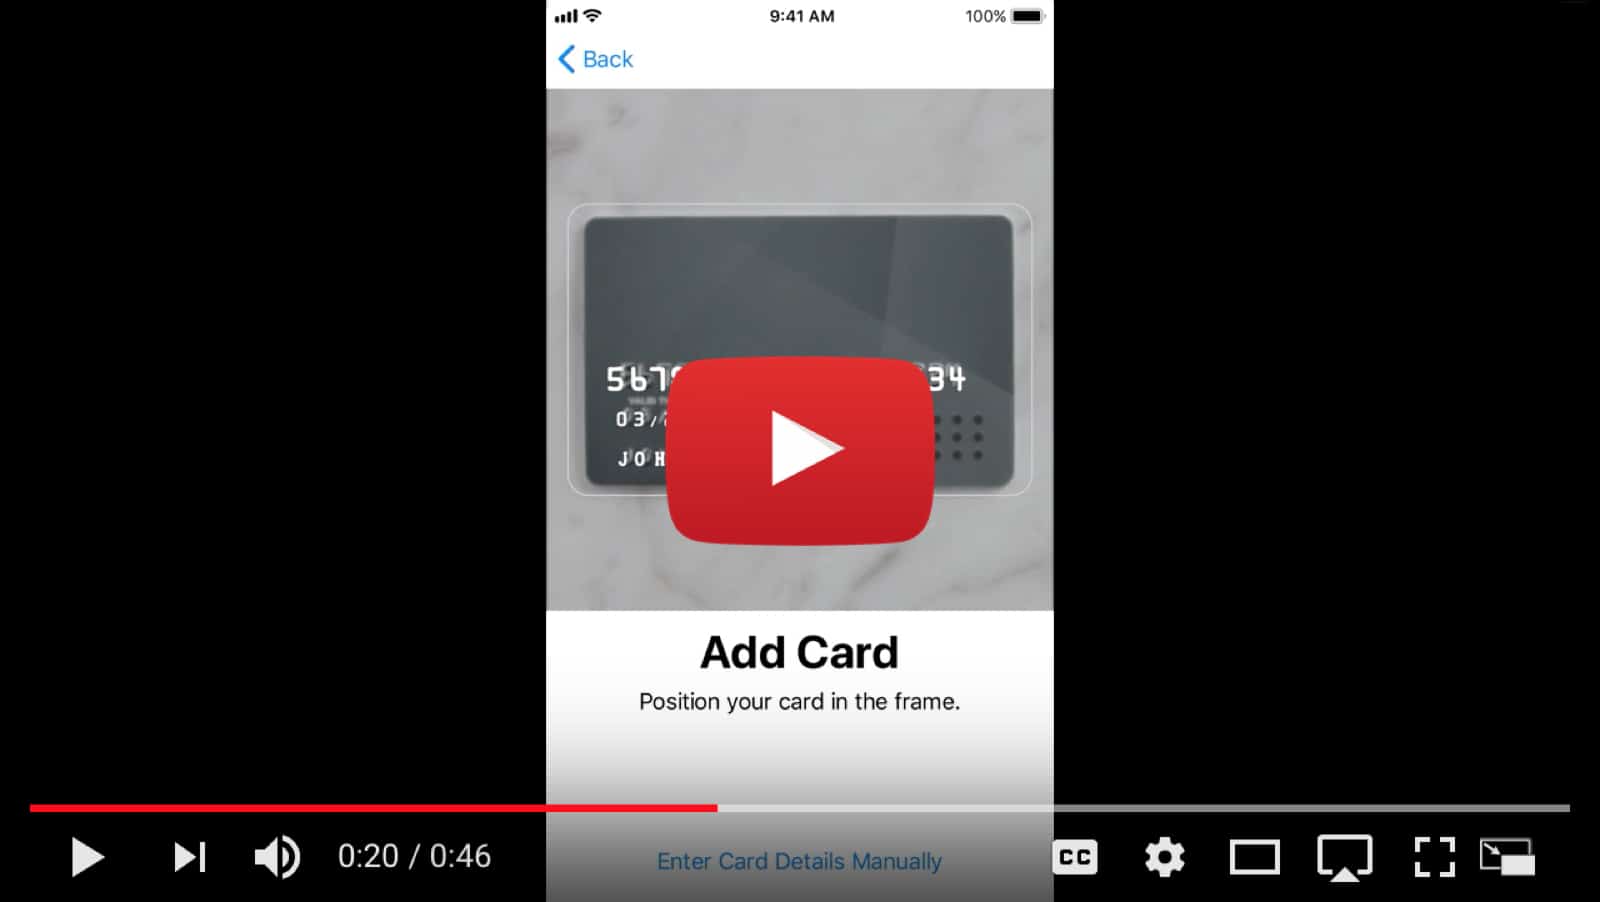 Apple Posted Apple Pay How To Videos on YouTube